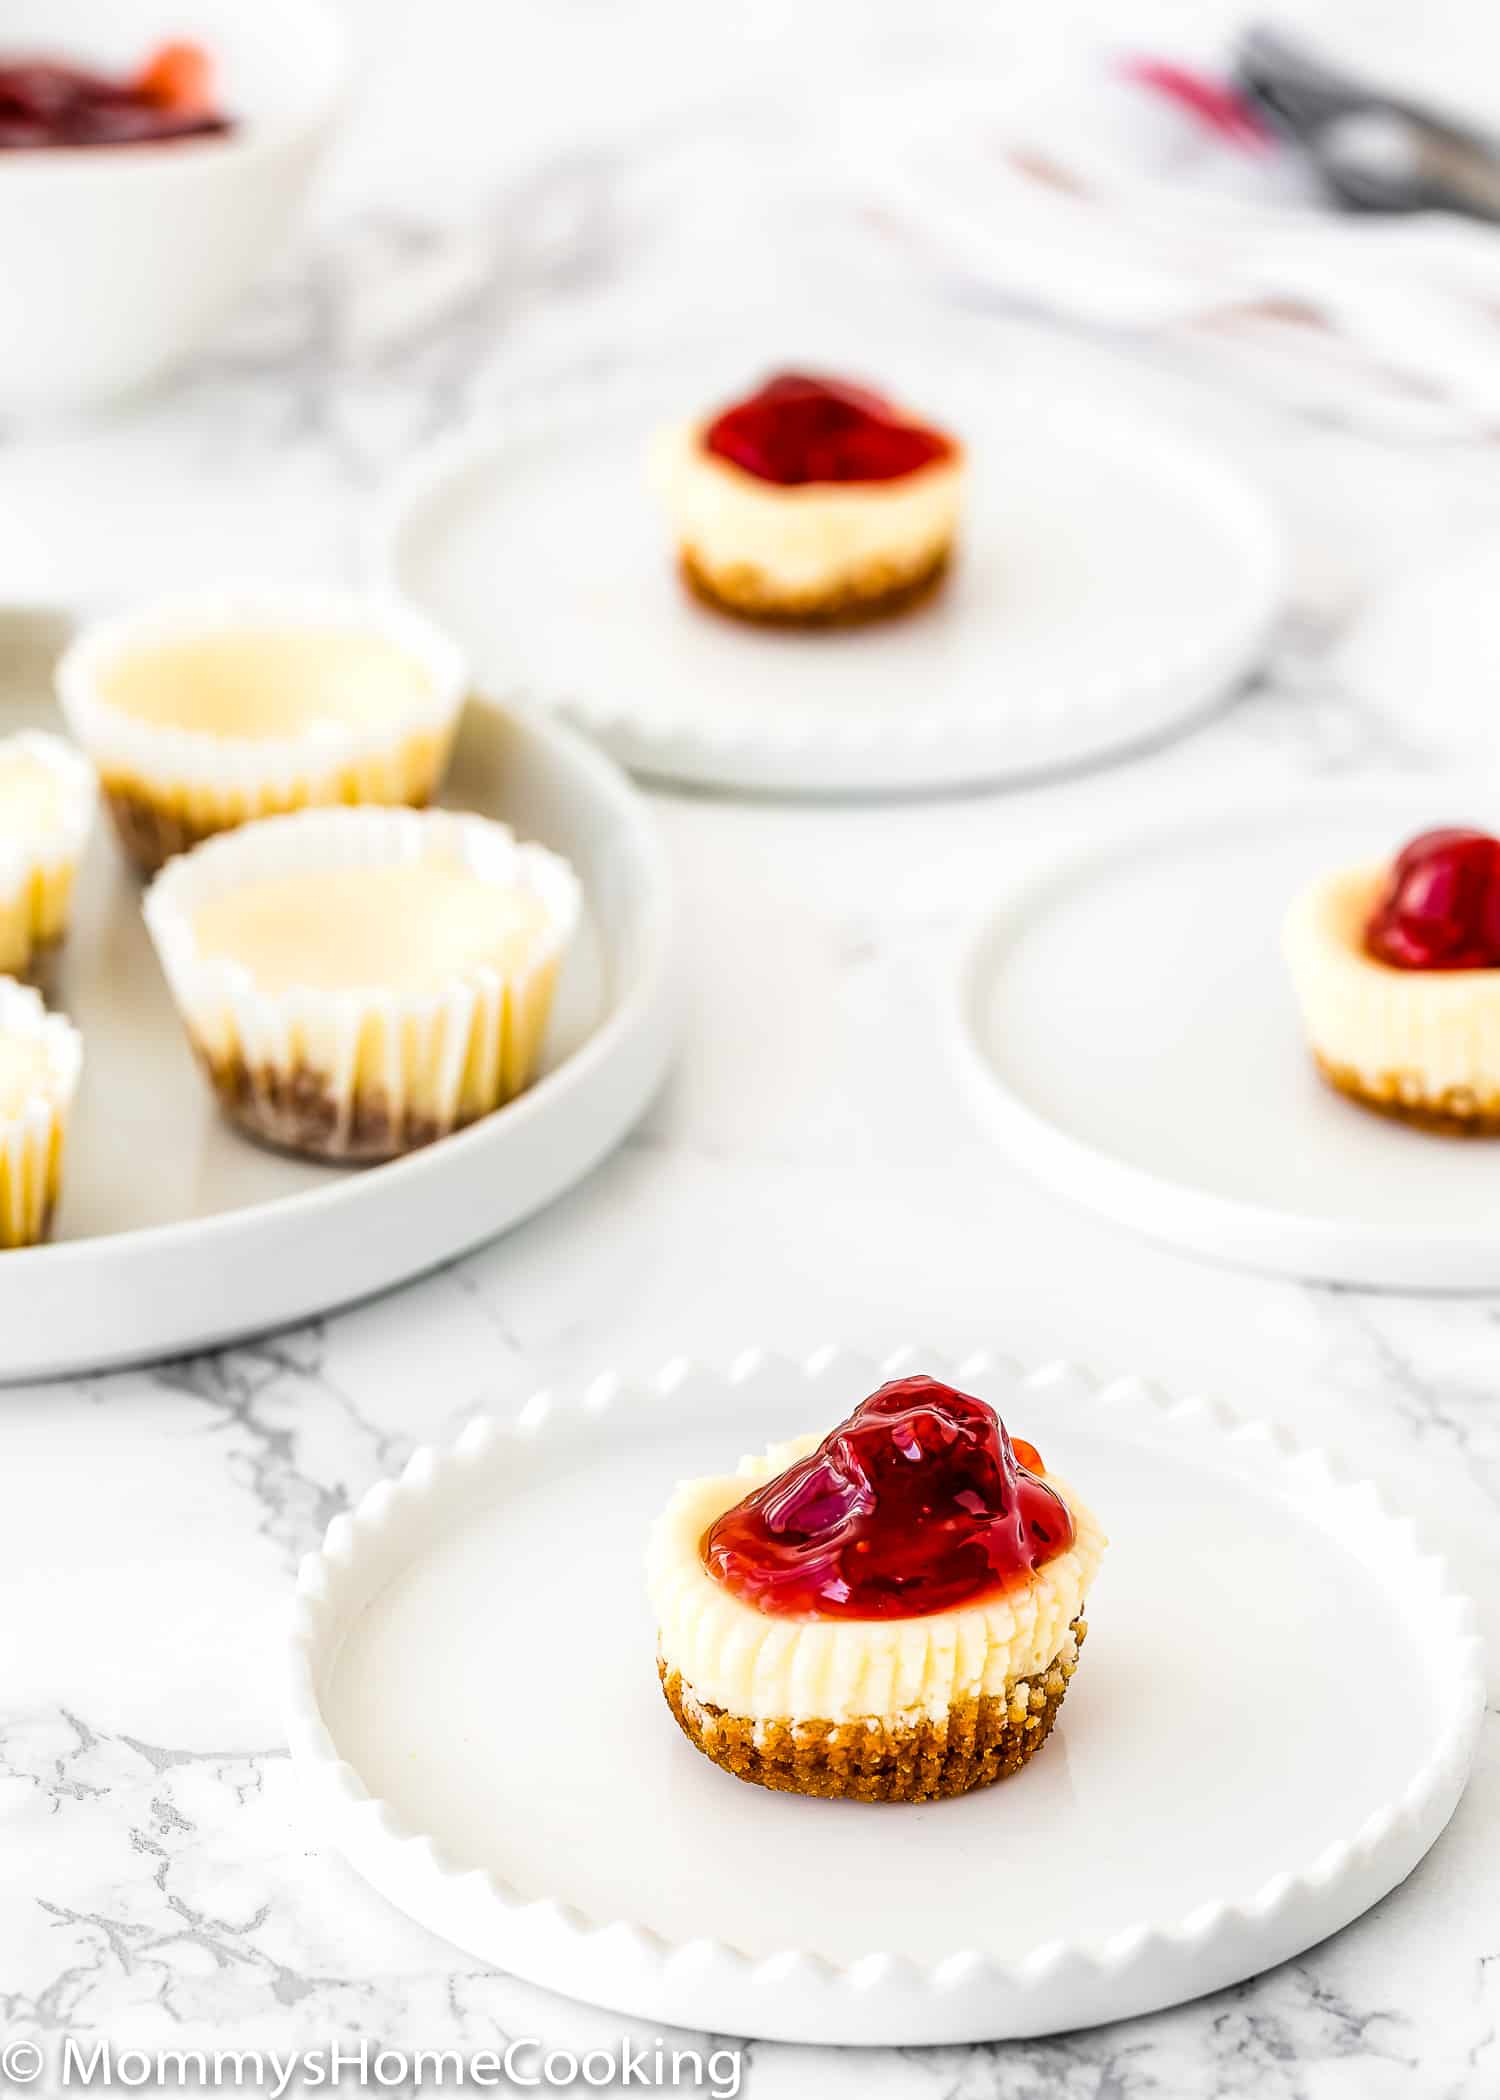 An Eggless Mini Cheesecake with strawberry sauce on top over a white plate with more mini cheesecakes in the background.